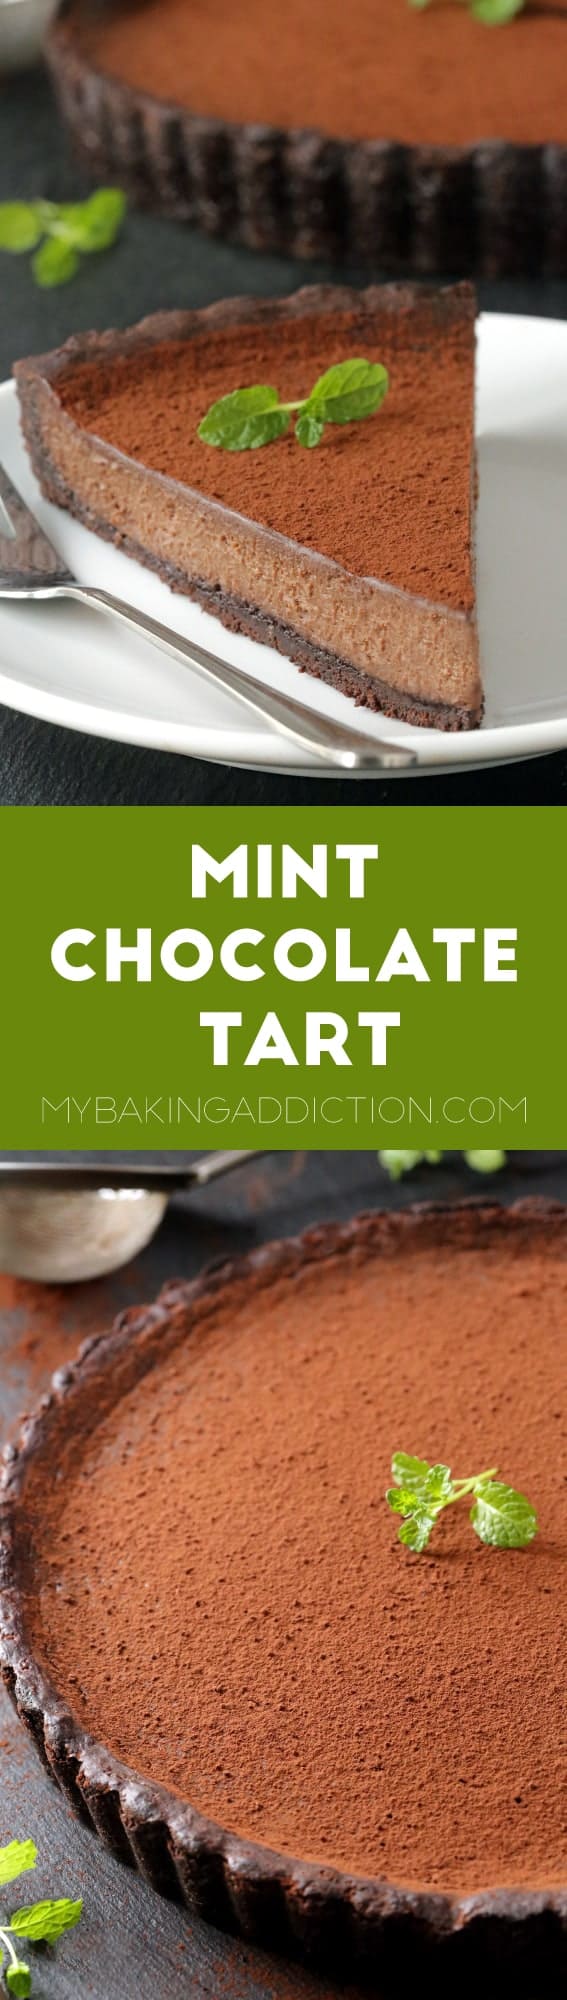 Mint chocolate tart with a rich and creamy filling and a homemade chocolate cookie crust. Recipe includes a gluten-free option. So delicious!